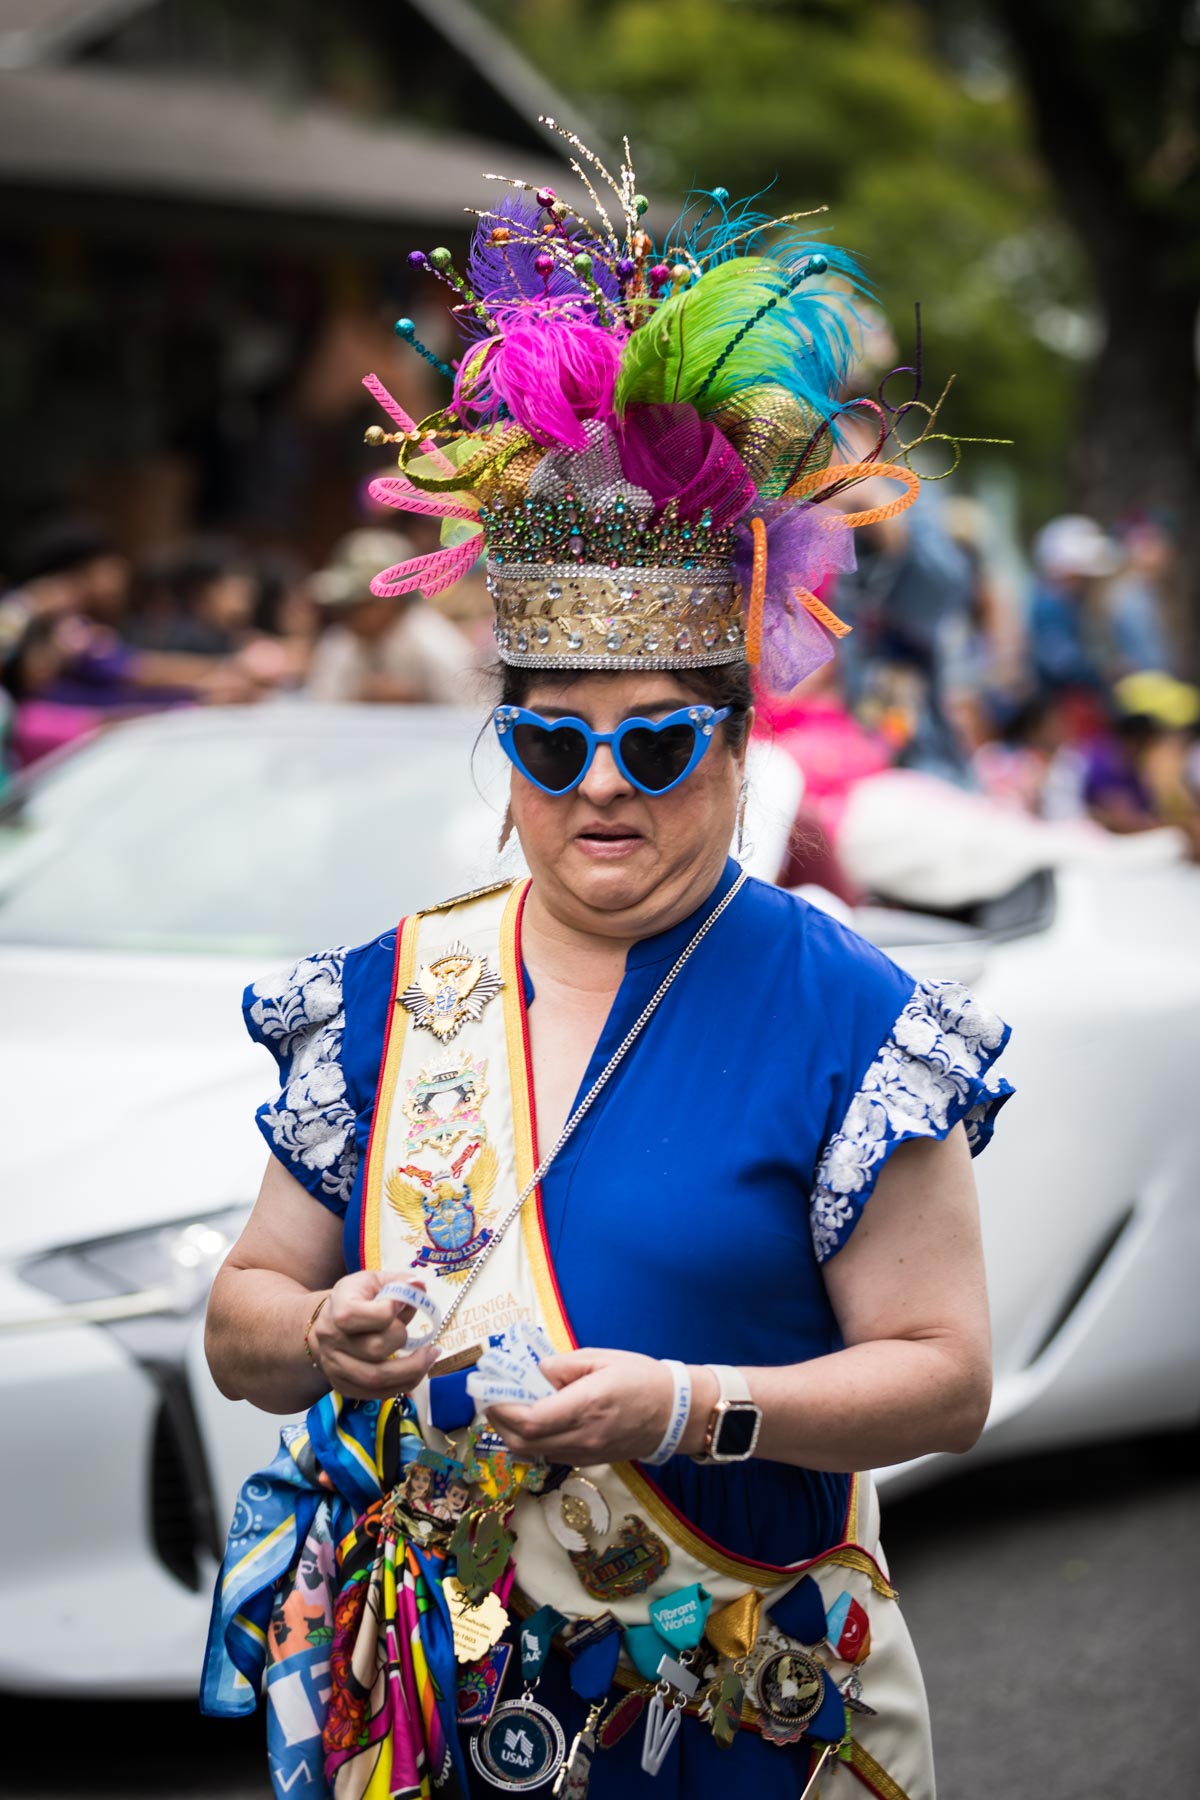 Woman dressed in crazy hat and sunglasses at King William Fair for an article on the best Fiesta photos